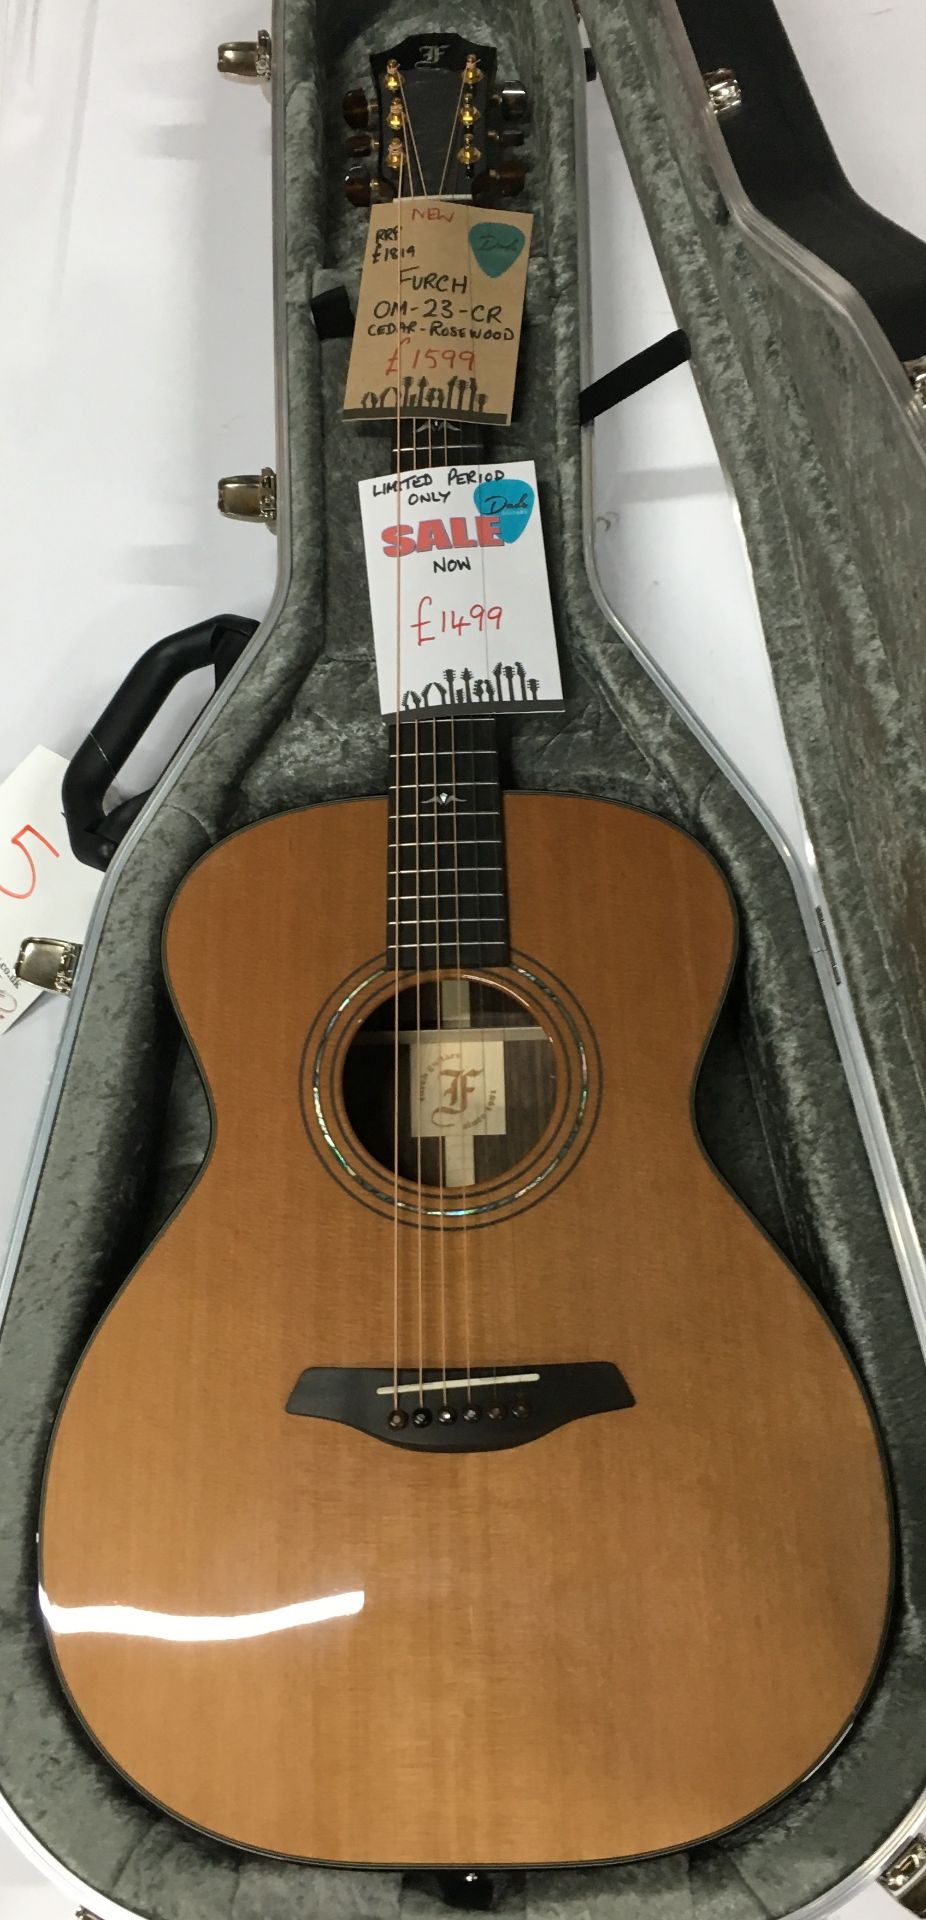 Furch OM-23-CR Acoustic Guitar | RRP £ 1,599 - Image 2 of 3